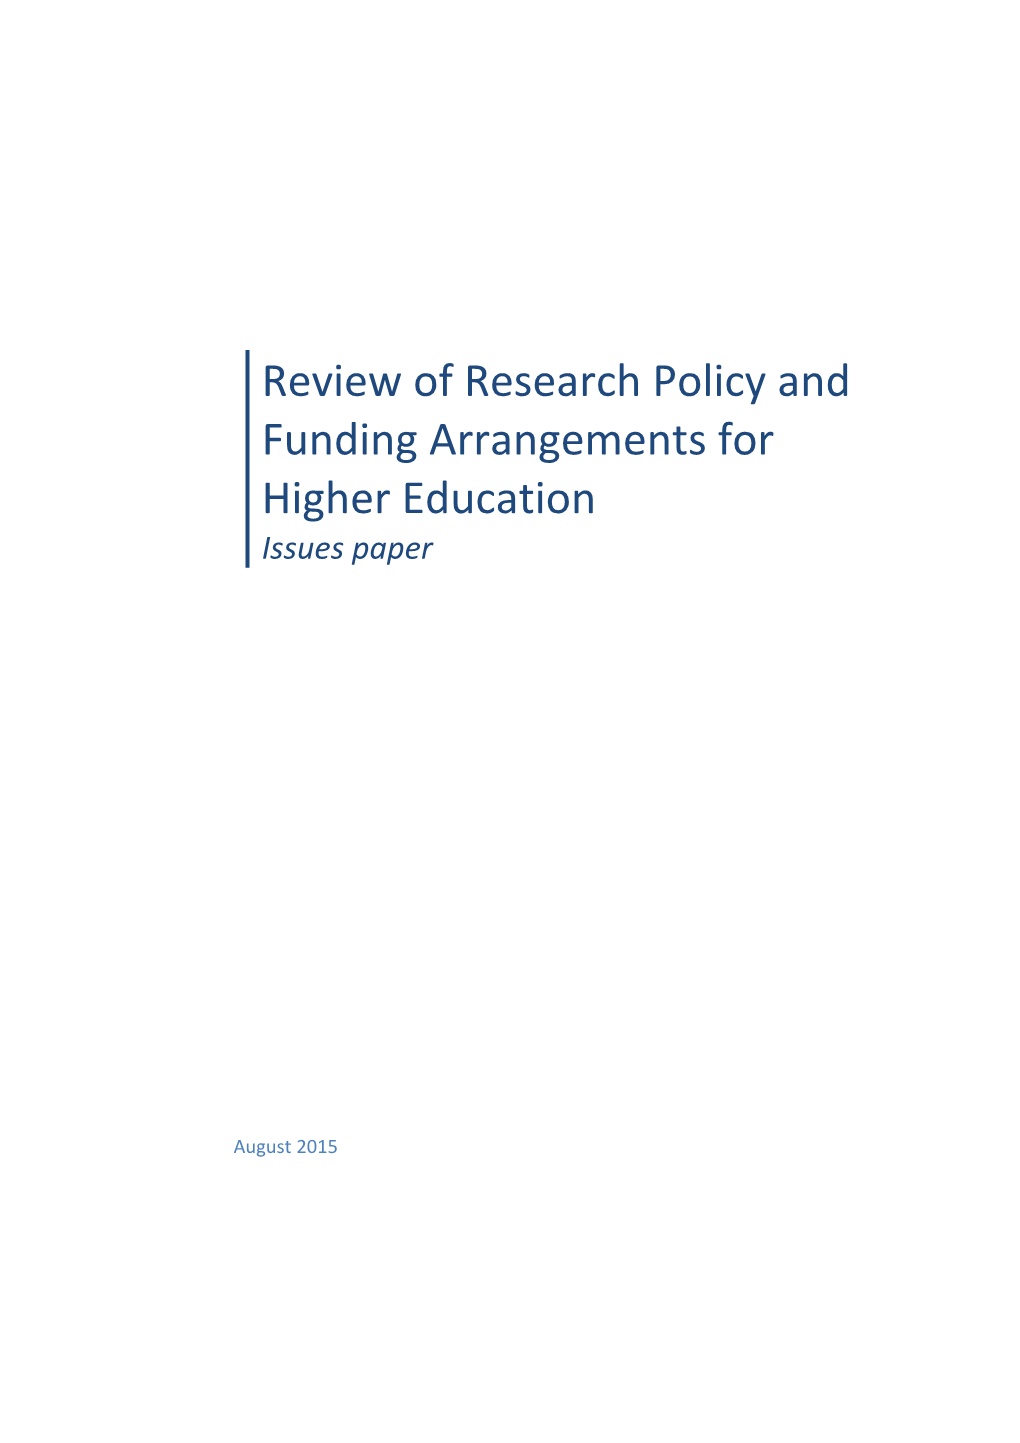 Eview of Research Policy and Funding Arrangements for Higher Educatio